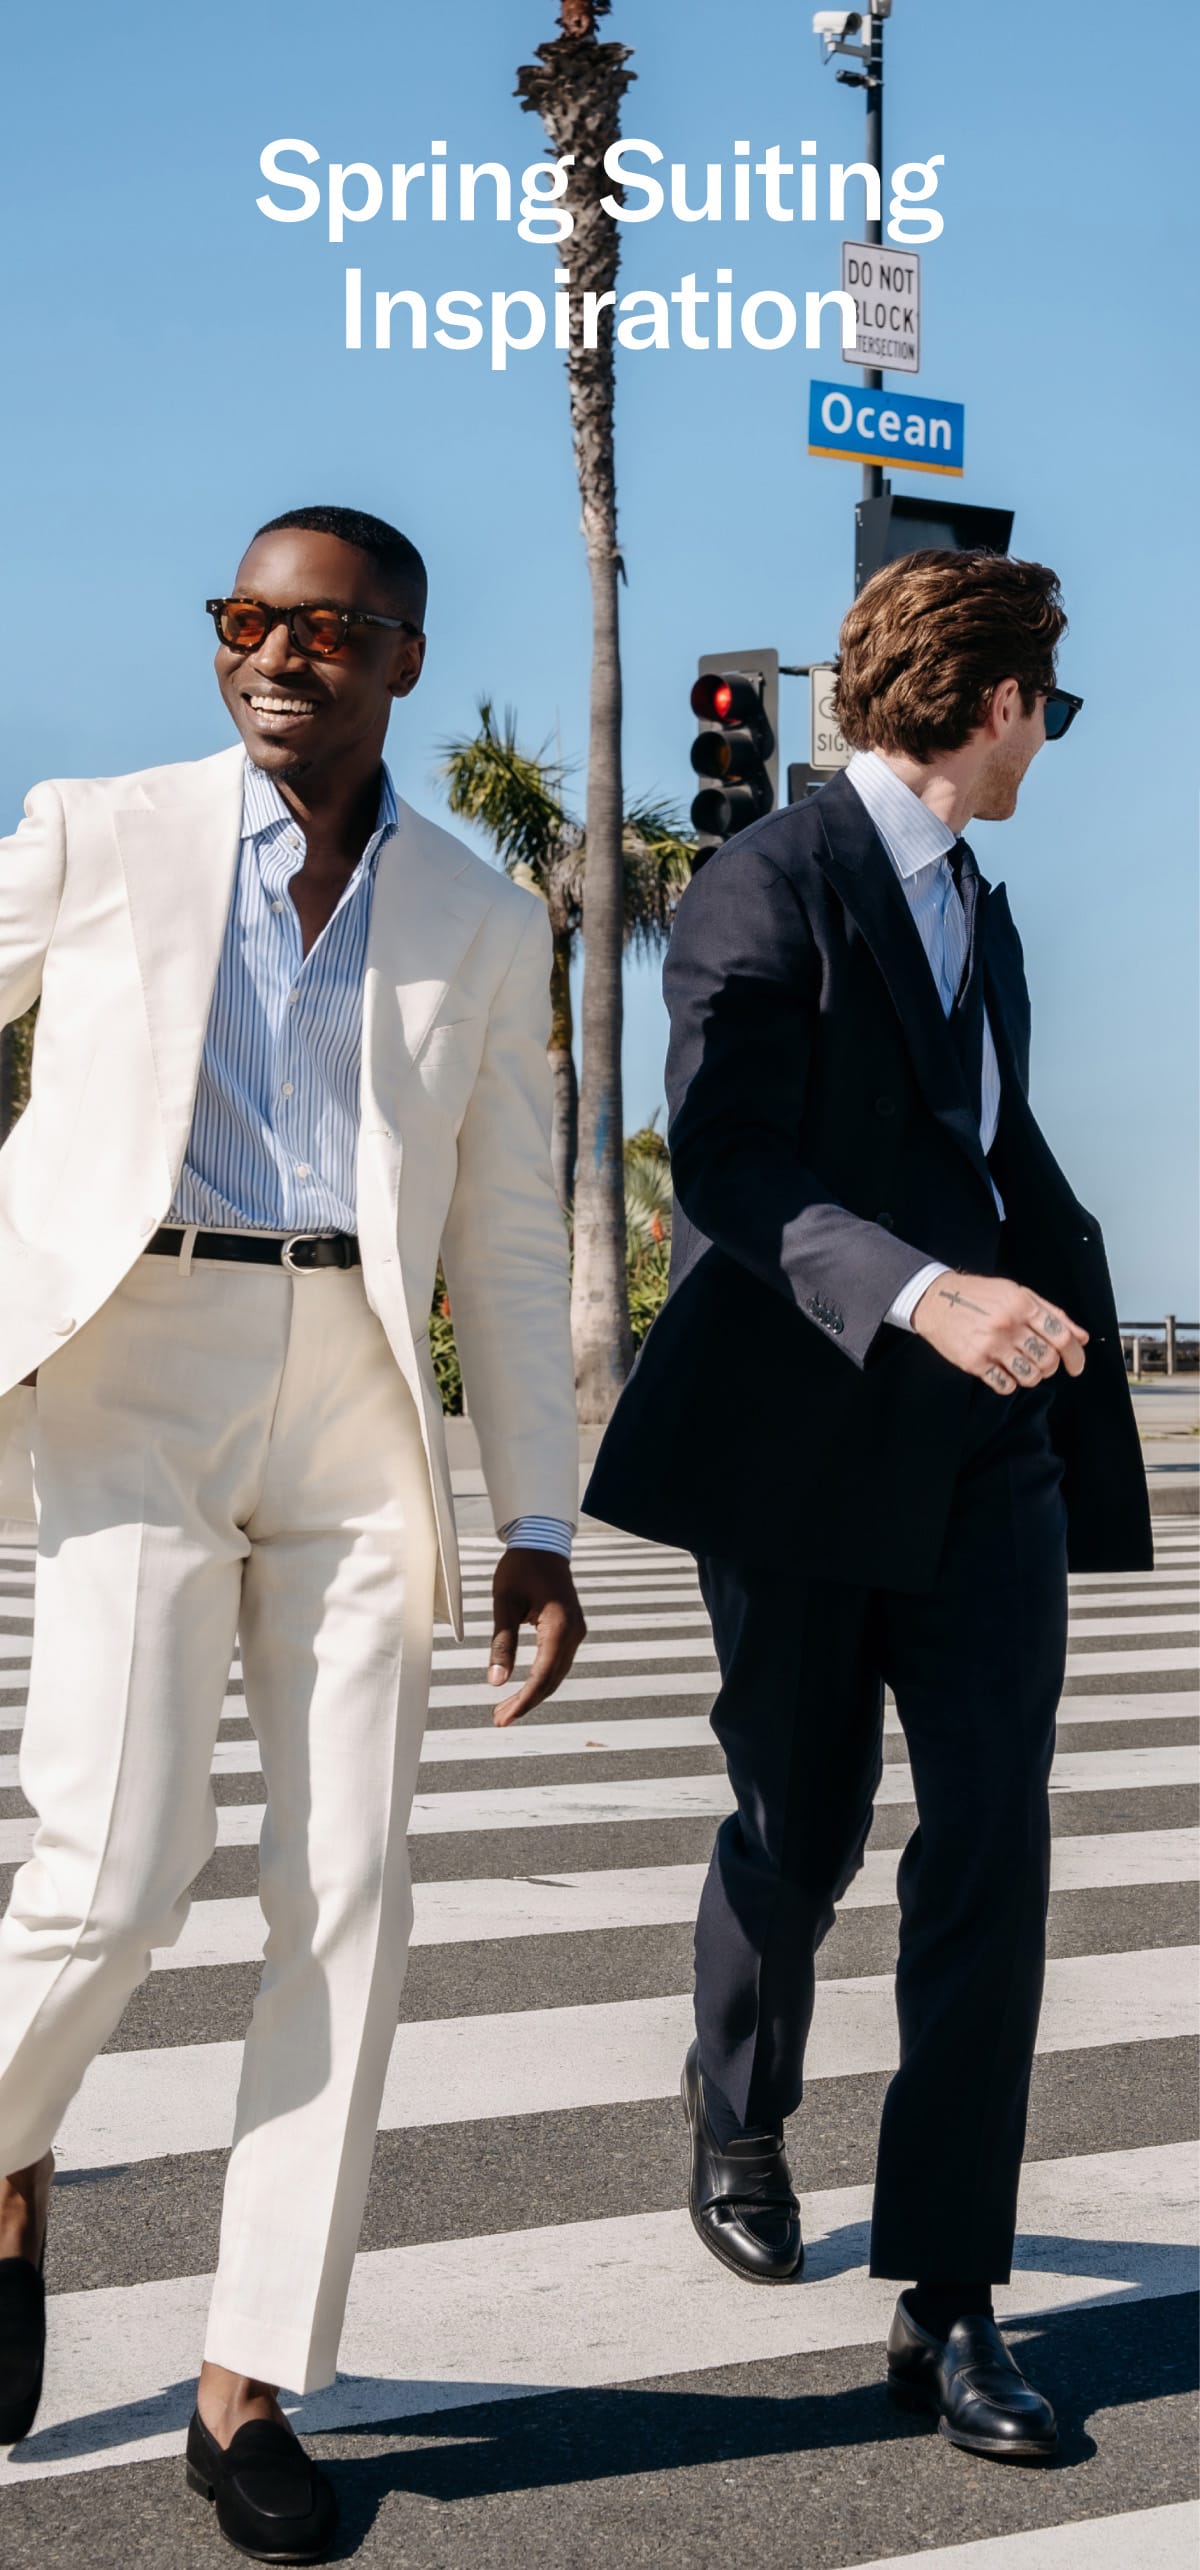 Spring suiting inspiration